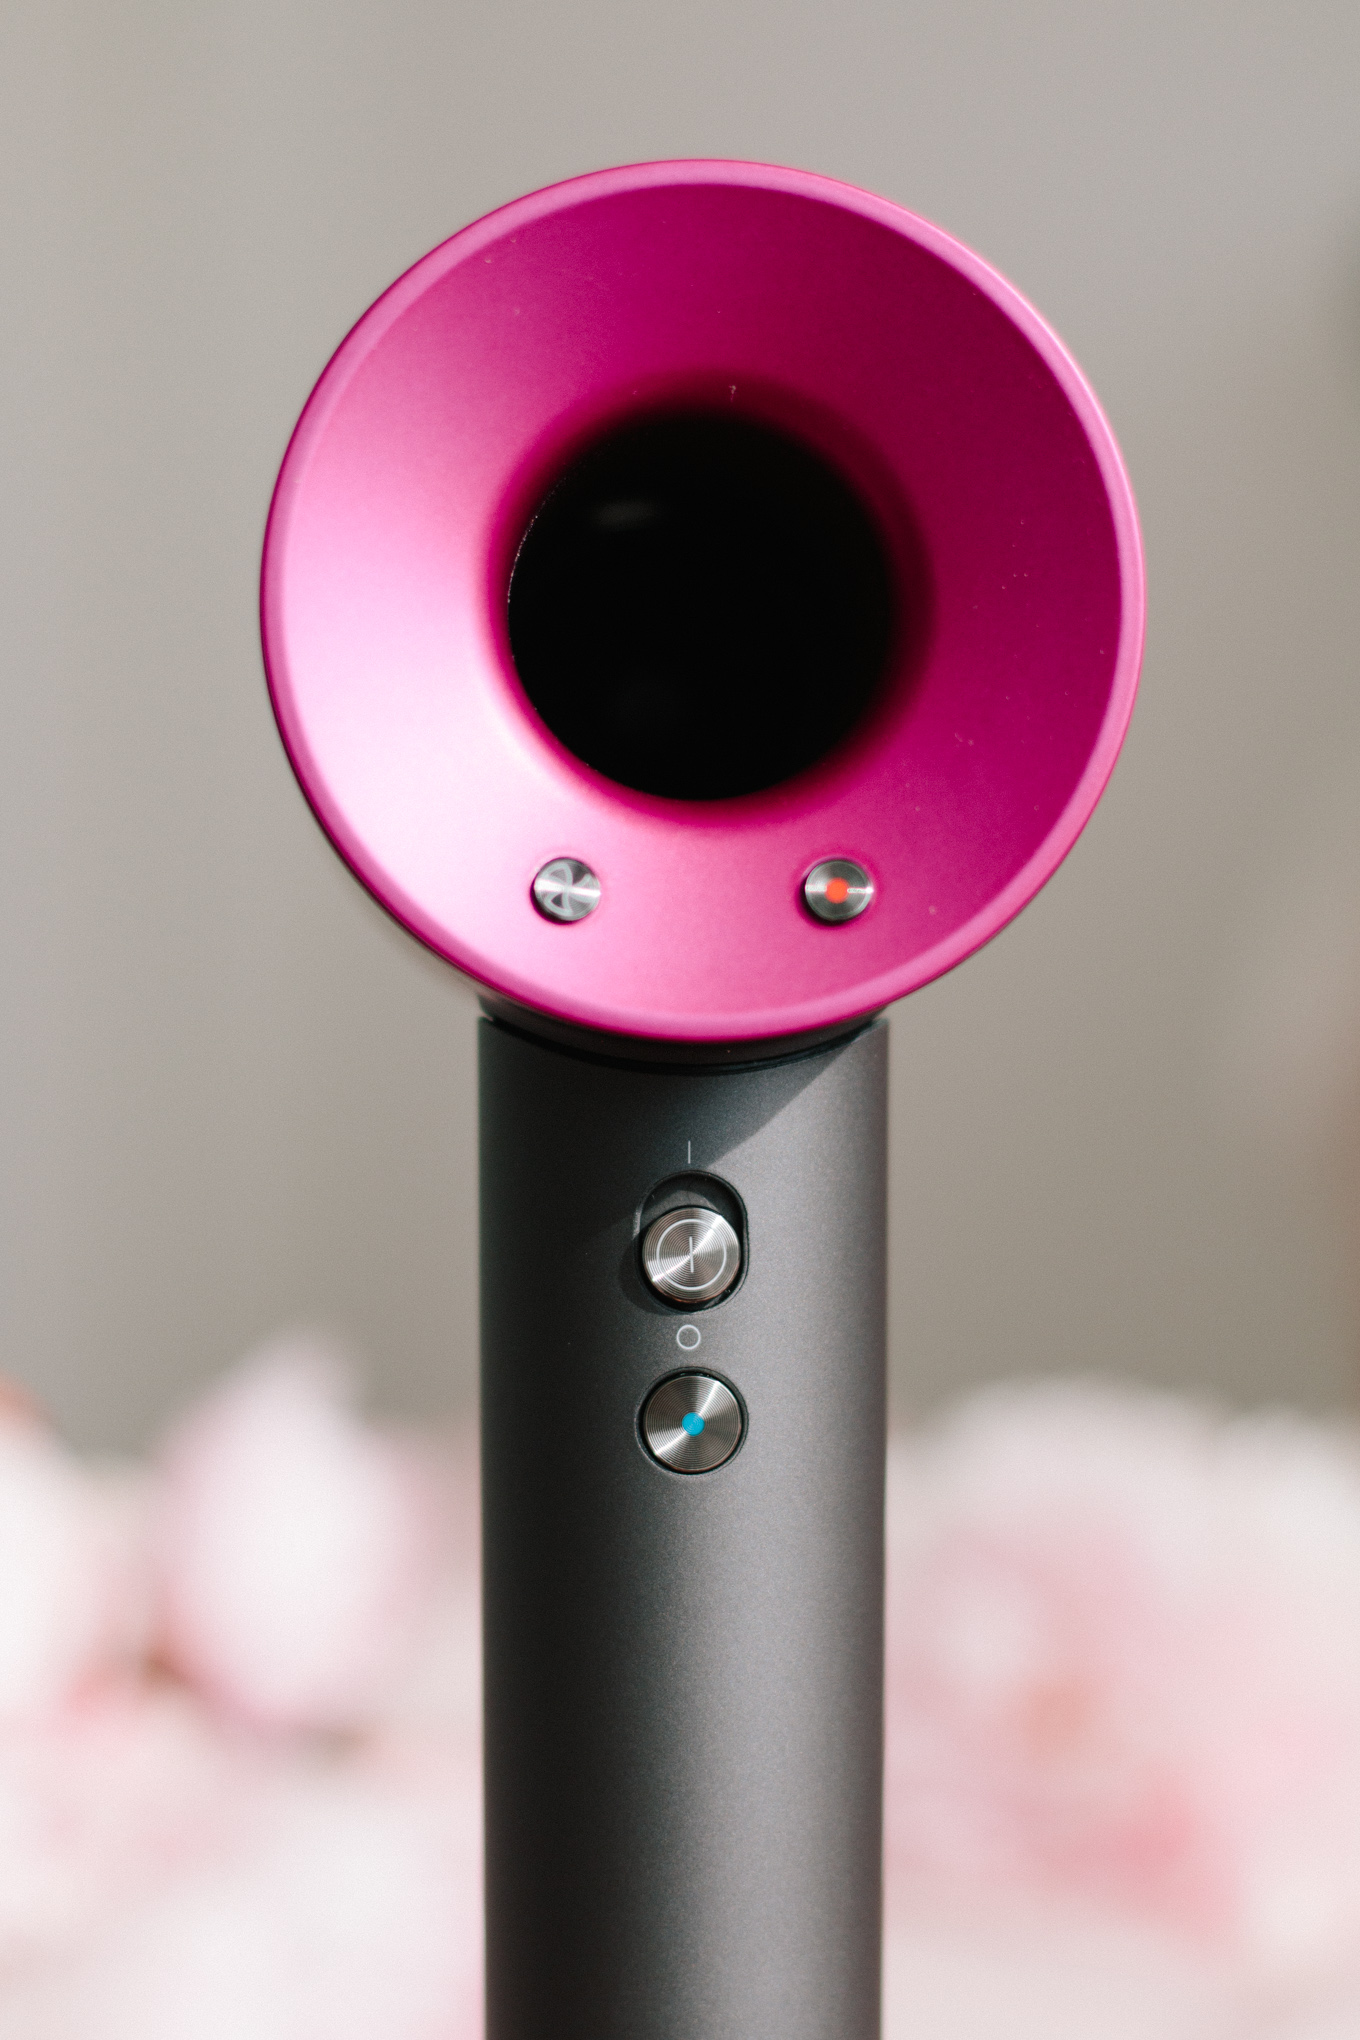 Dyson Supersonic Review, Dyson Hairdryer